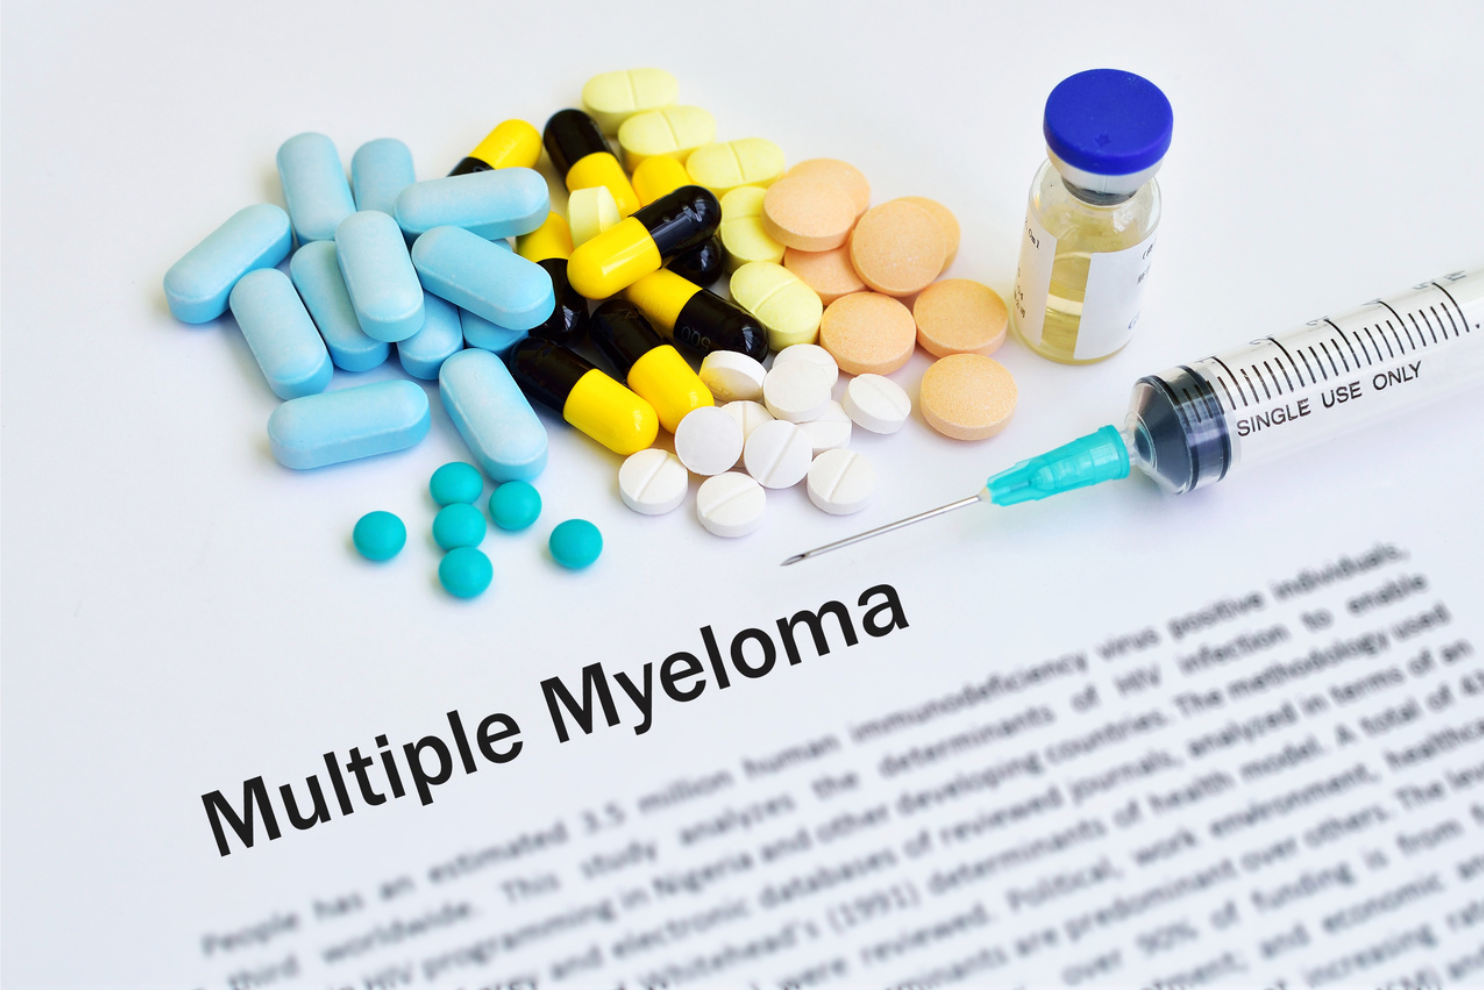 New Bispecific Monoclonal Antibody Shows Deep, Durable Responses in Relapsed, Refractory Multiple Myeloma